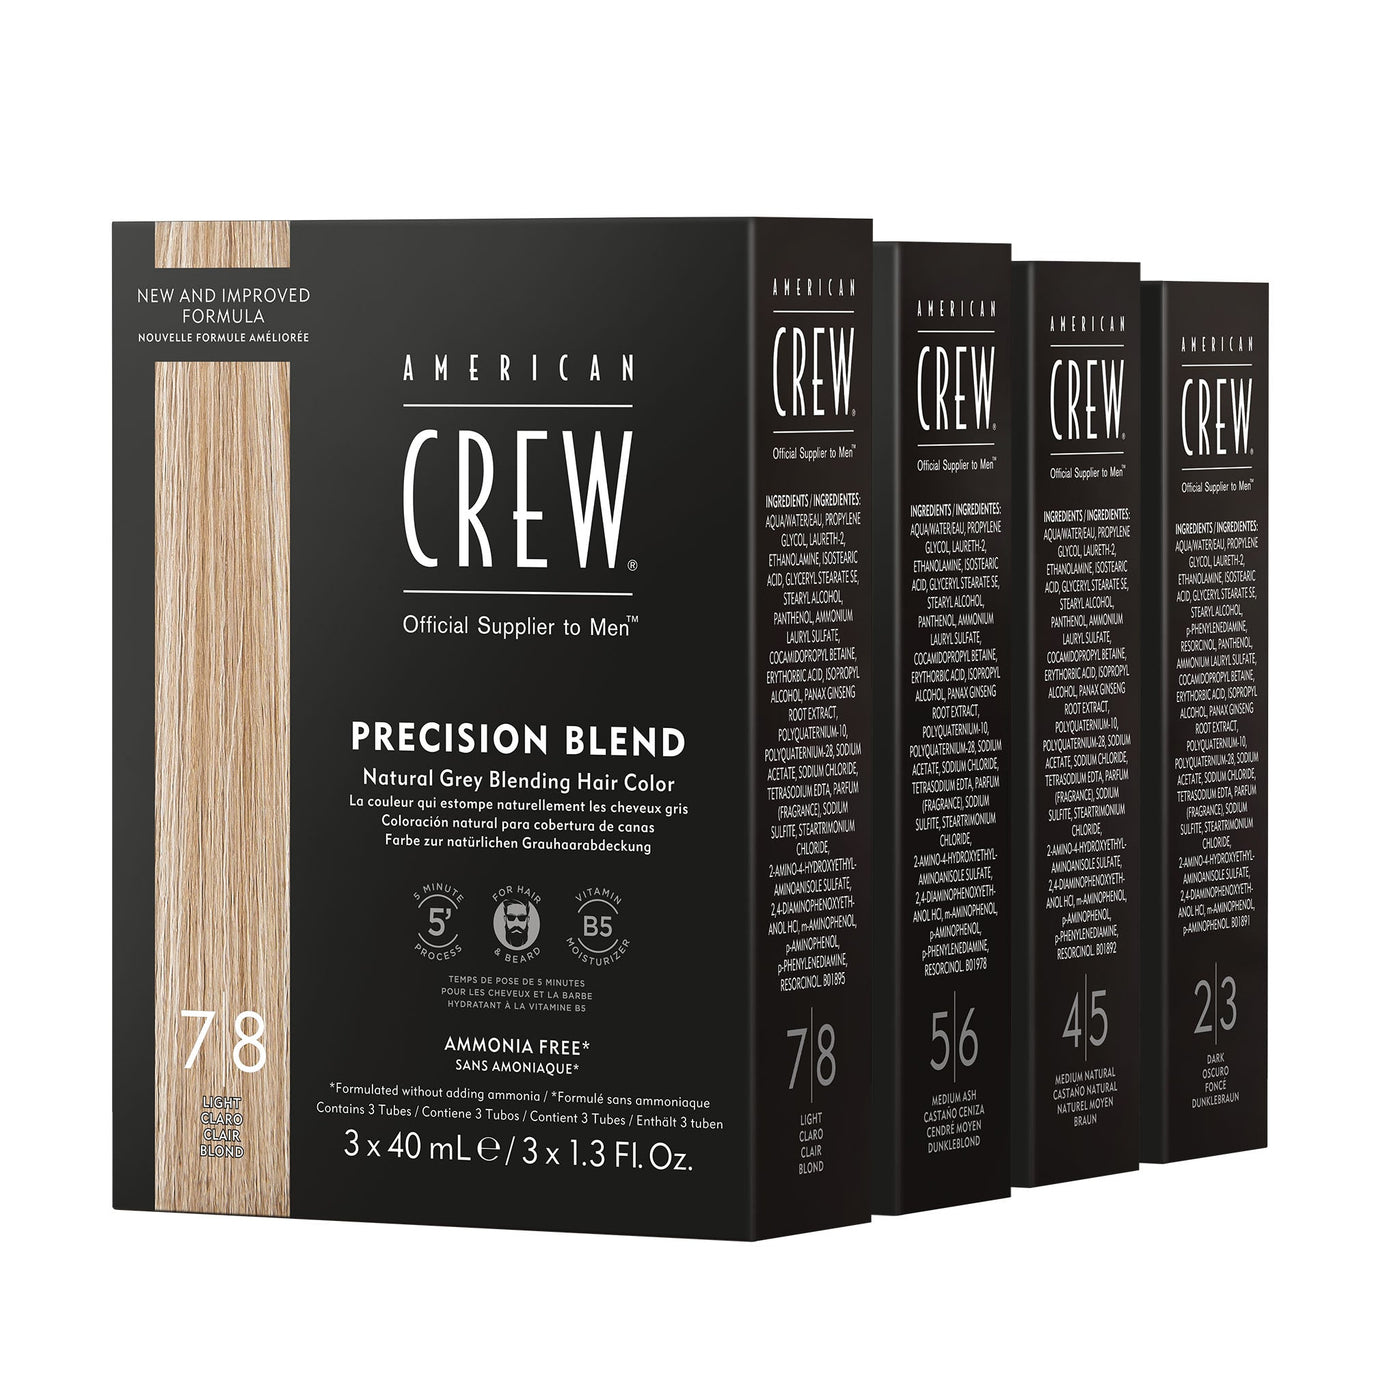 American Crew Precision Blend (3 x 40ml) available in four shades